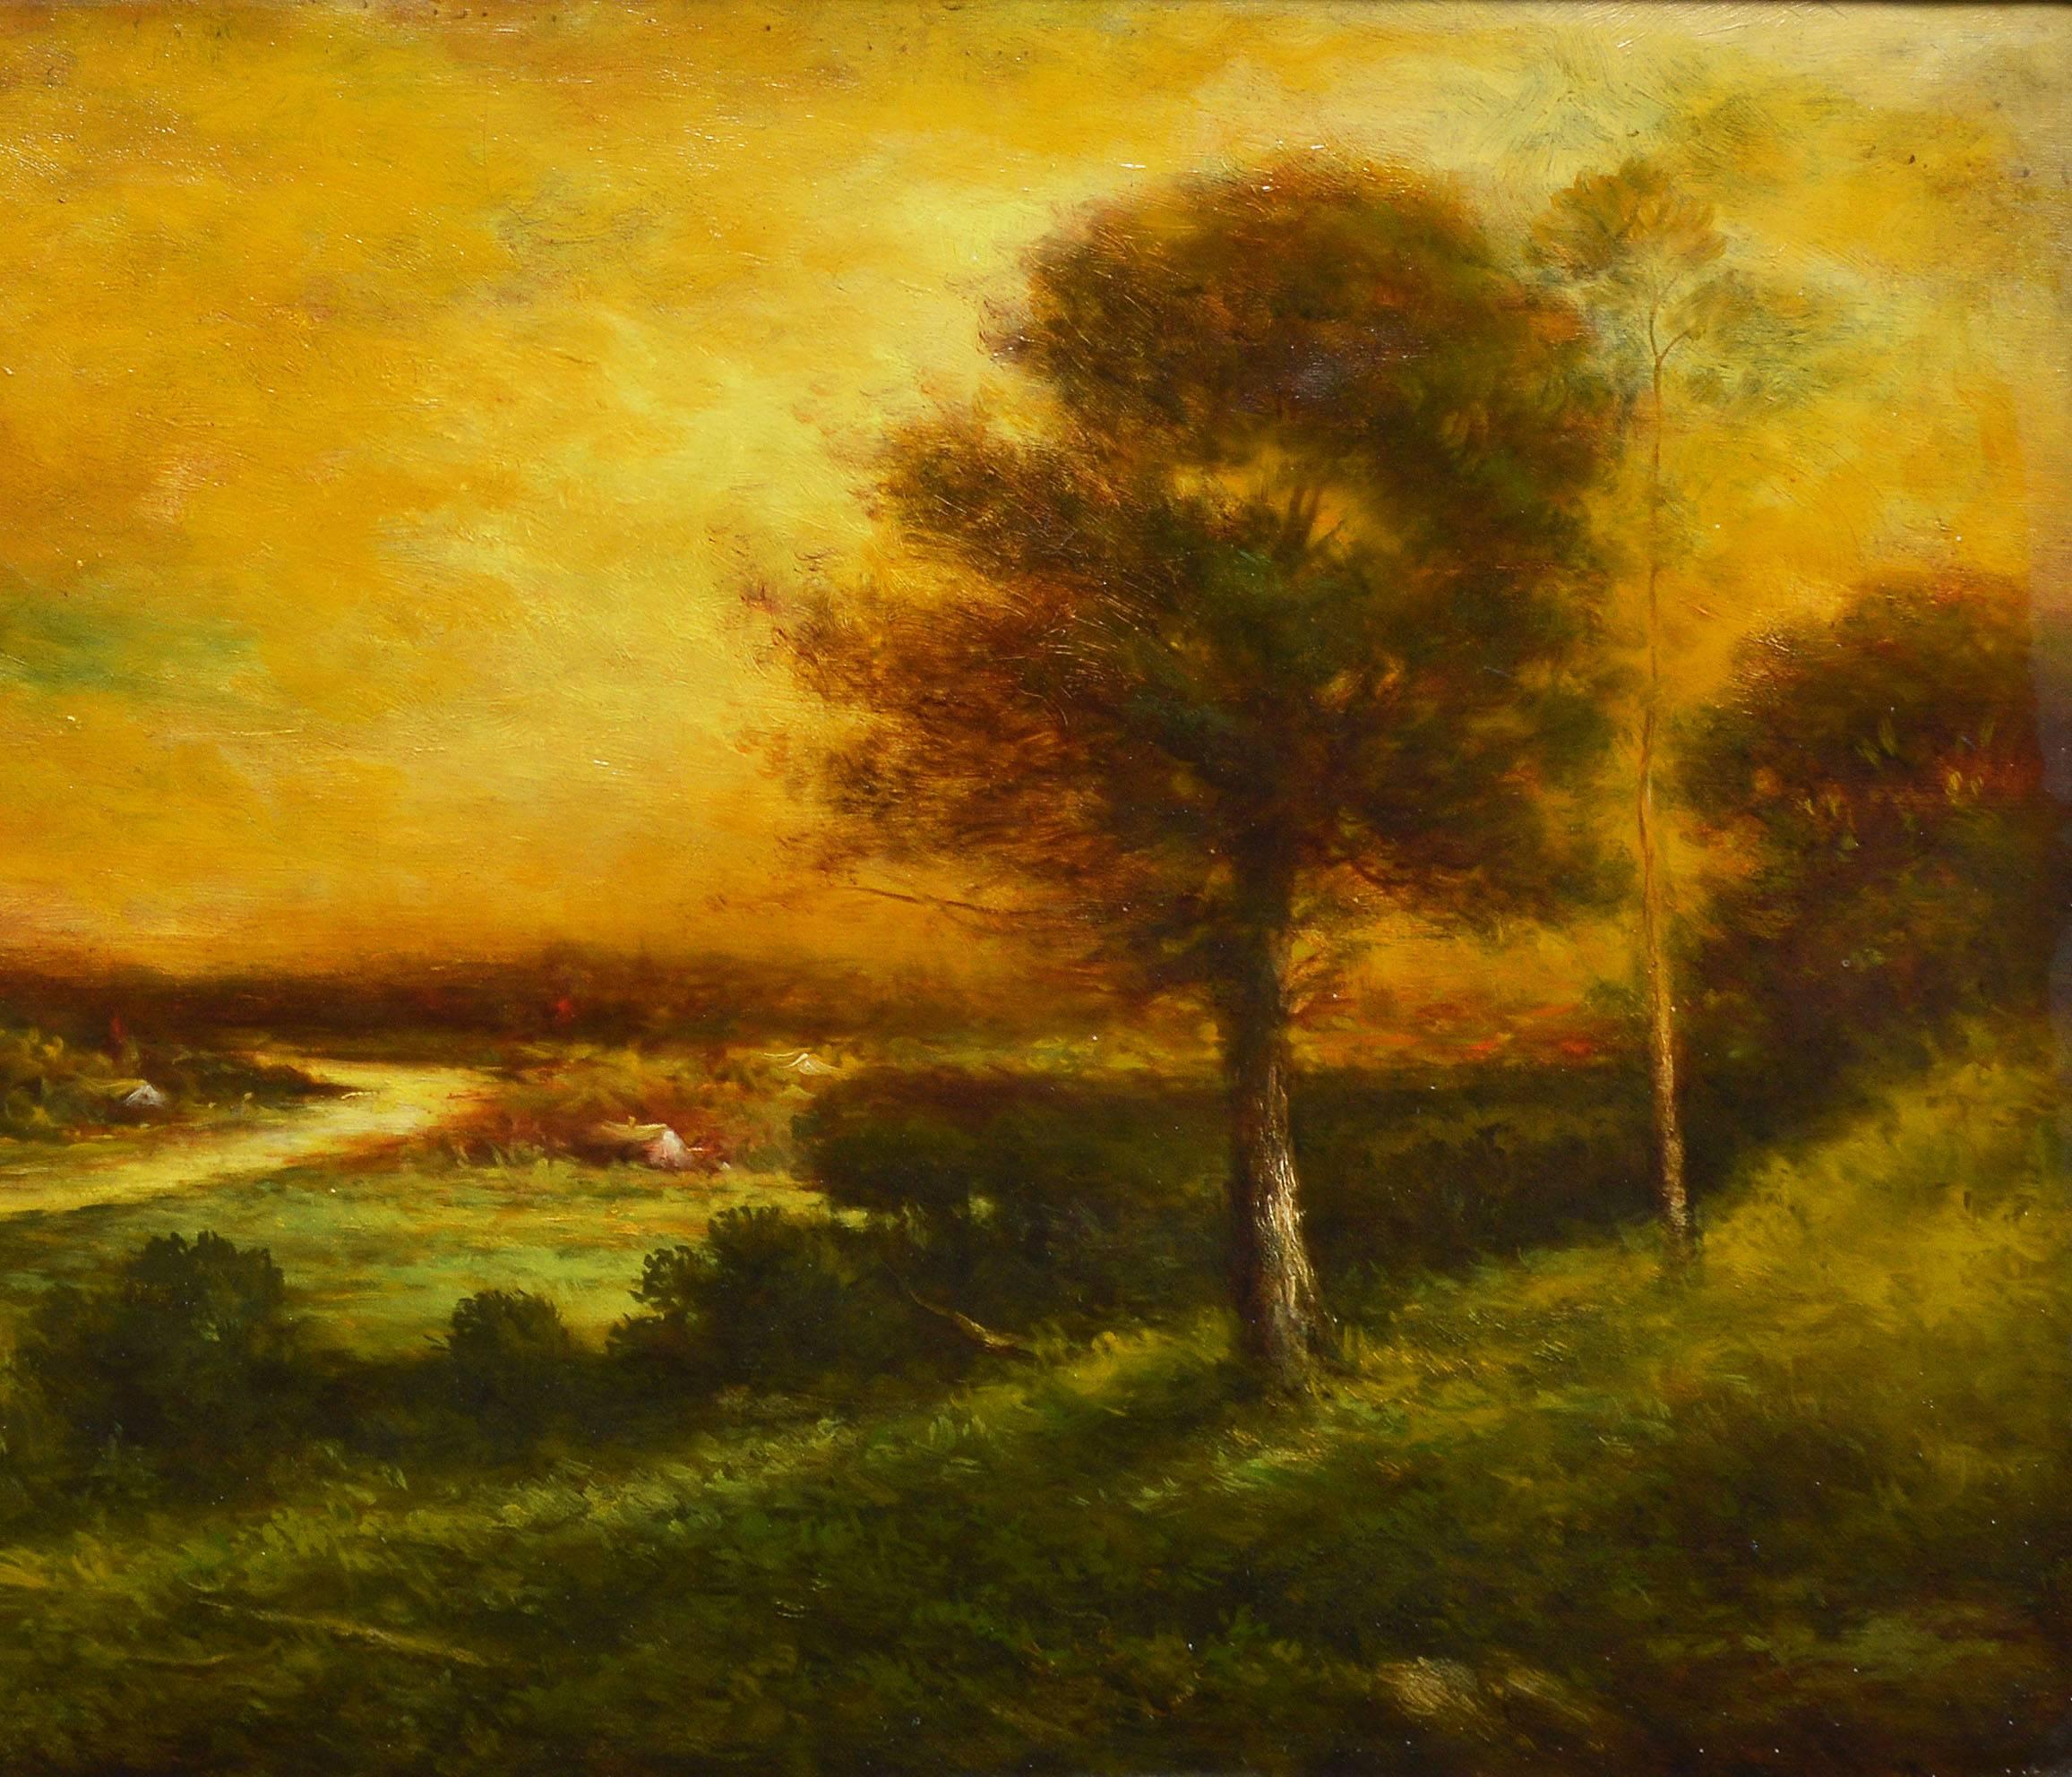 Hudson River School Landscape with a Luminous Sunset by Hudson Kitchell - Brown Landscape Painting by Hudson Mindell Kitchell